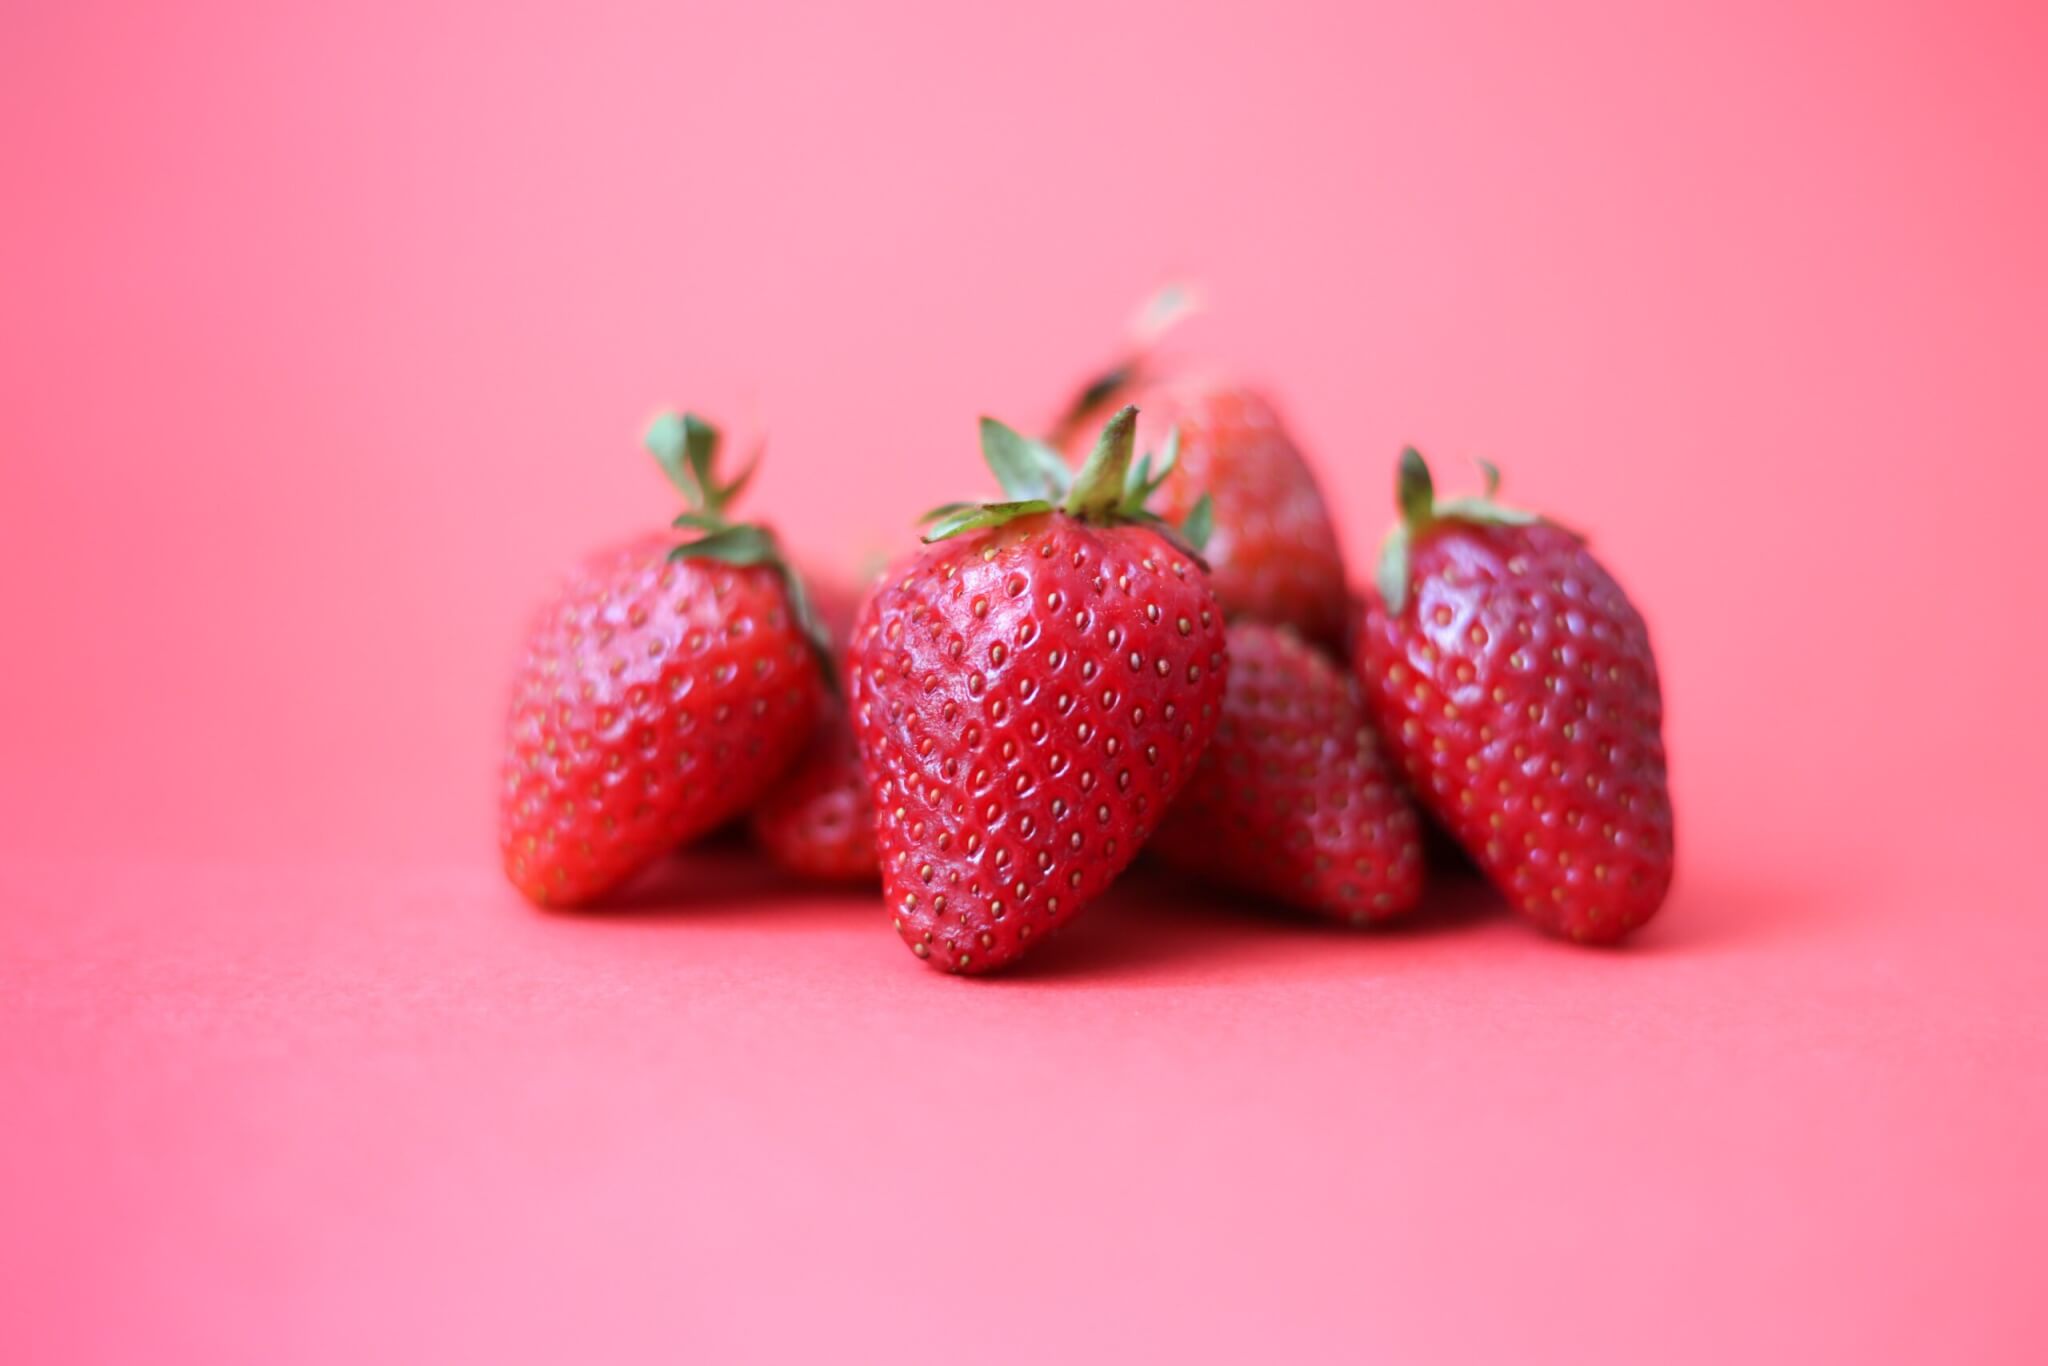 strawberries in a pink background